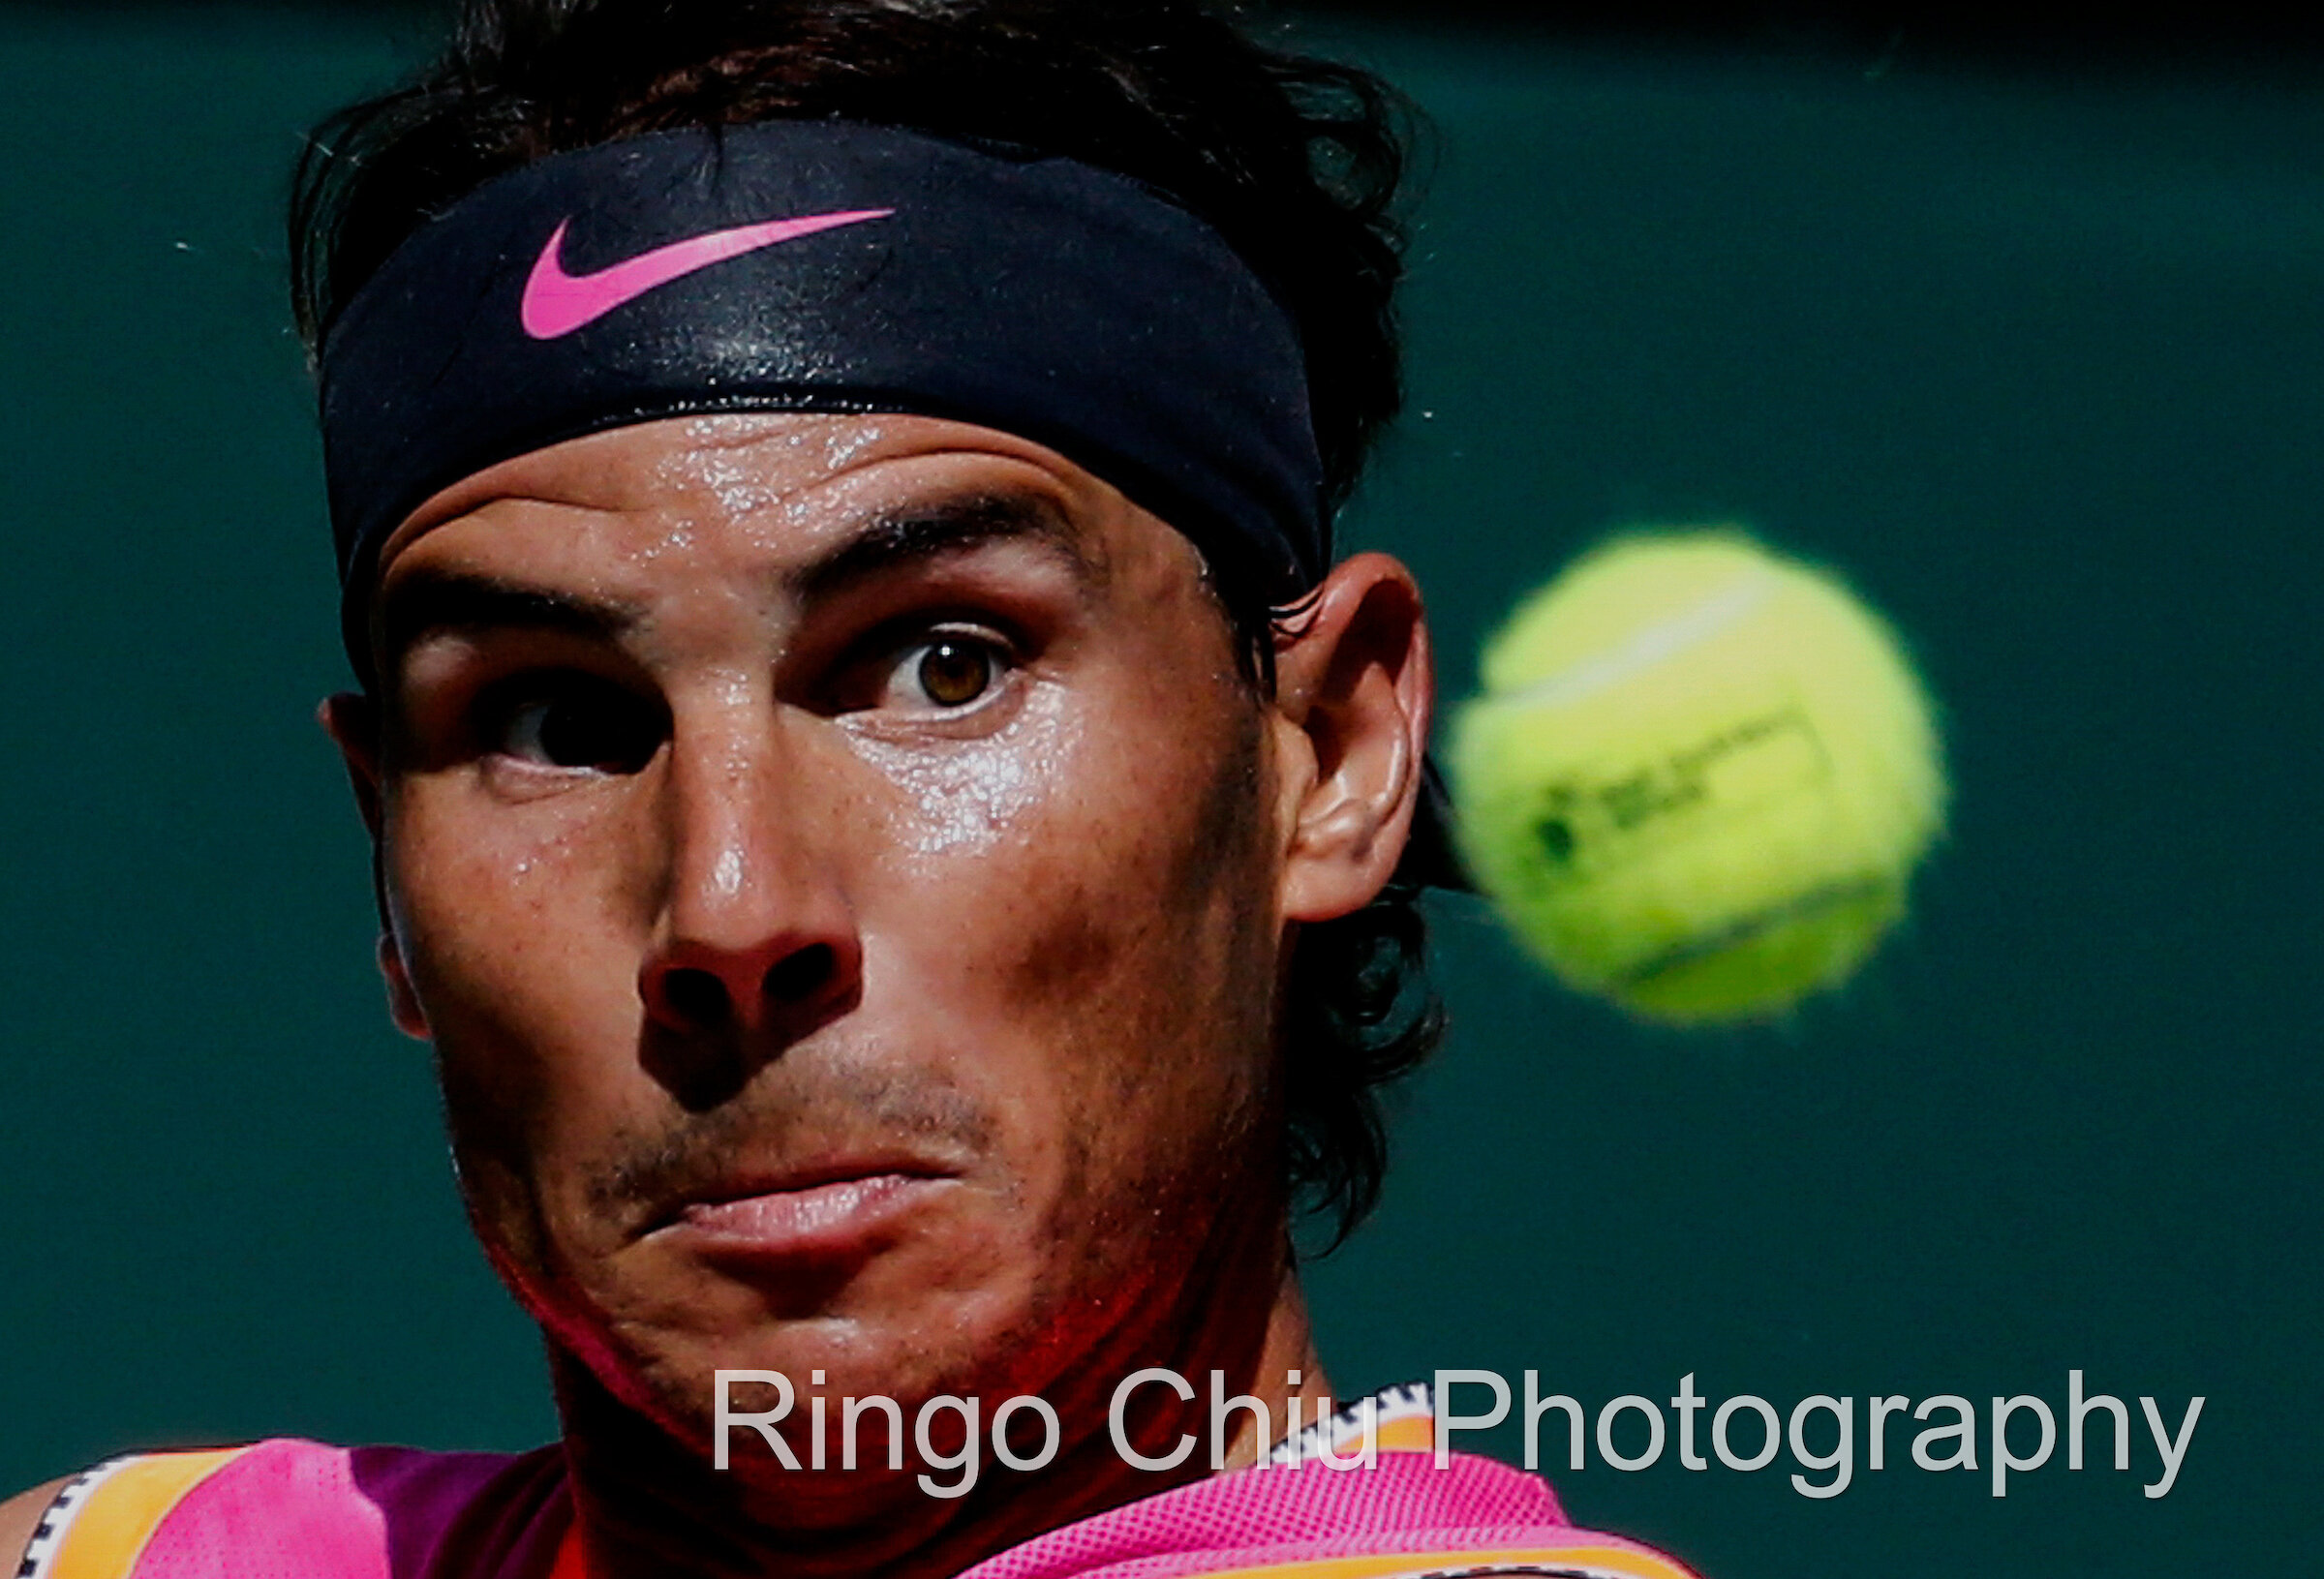  Rafael Nadal of Spain, returns the ball to Diego Schwartzman of Argentina, during the men singles third round match of the BNP Paribas Open tennis tournament on Tuesday, March 12, 2019 in Indian Wells, California, the United States. 